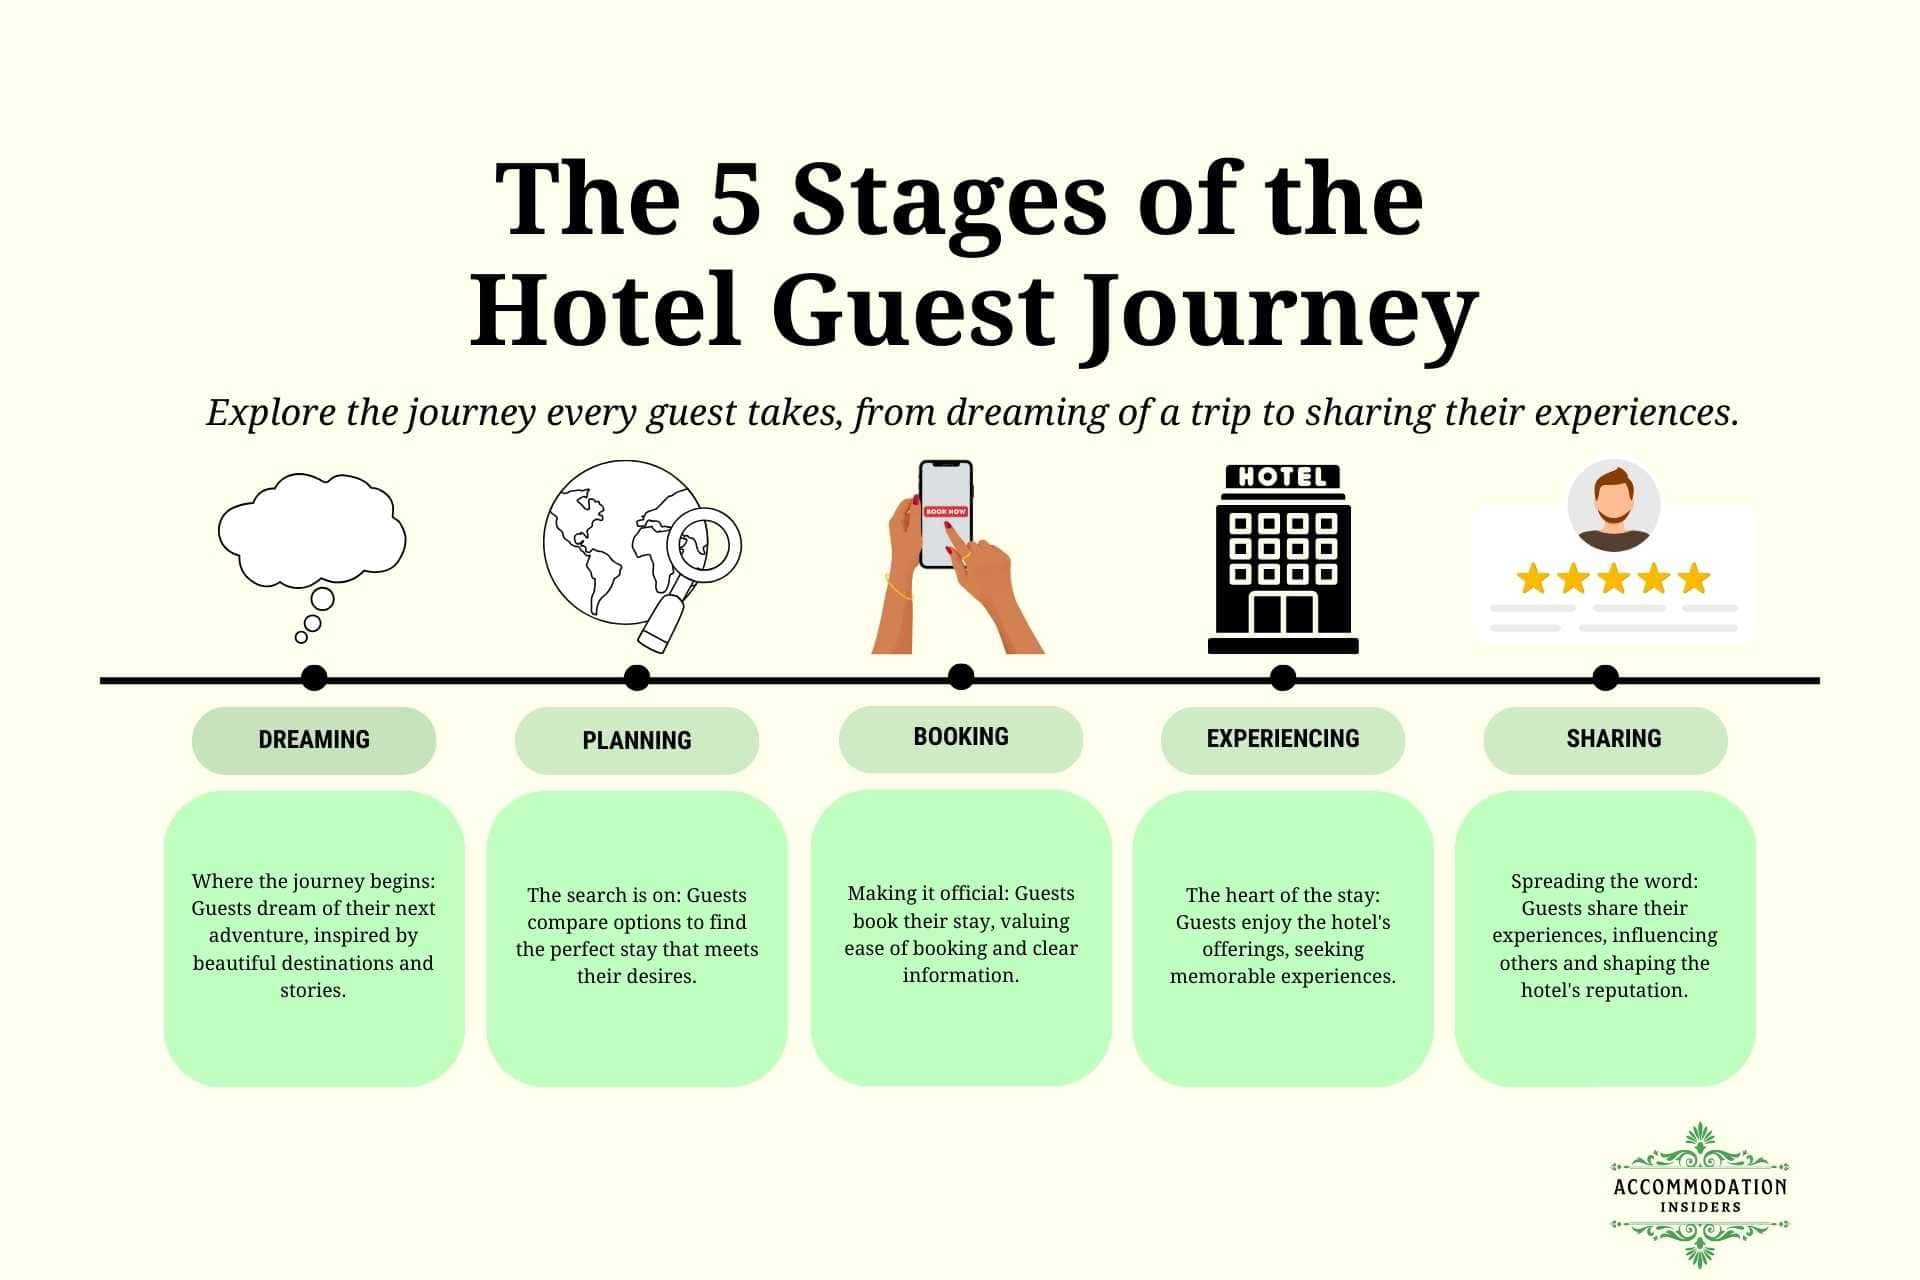 Infographic titled 'The 5 Stages of the Hotel Guest Journey' outlines the steps of Dreaming, Planning, Booking, Experiencing, and Sharing, complete with descriptions and icons for each stage, created by Accommodation Insiders to enhance understanding of the guest experience.